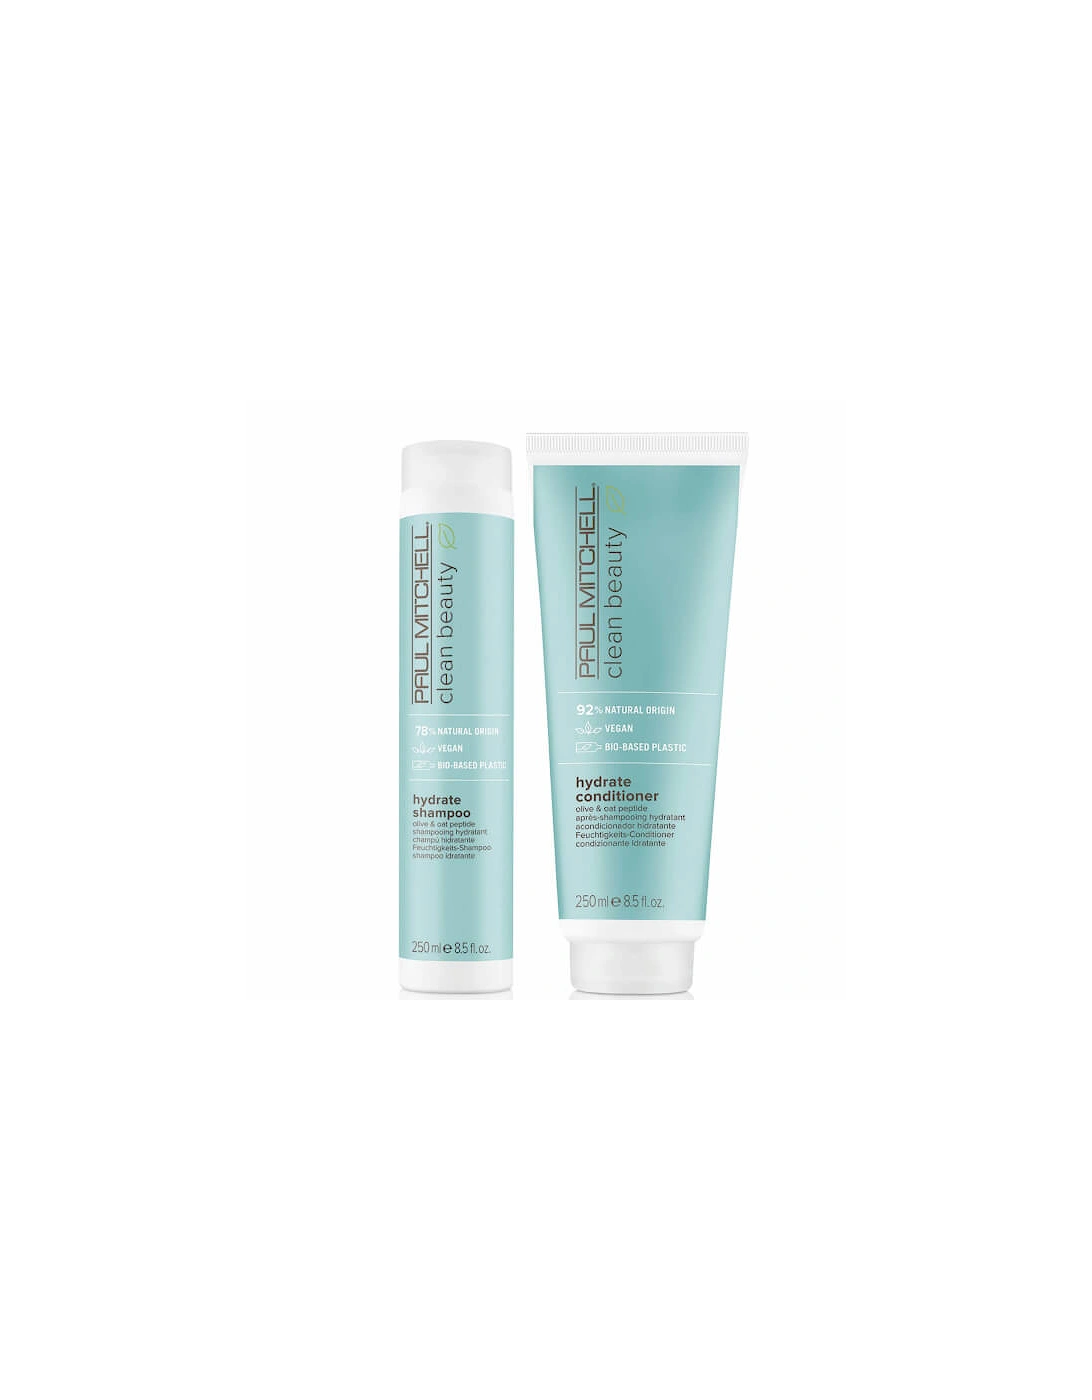 Clean Beauty Hydrate Shampoo and Conditioner Set, 2 of 1